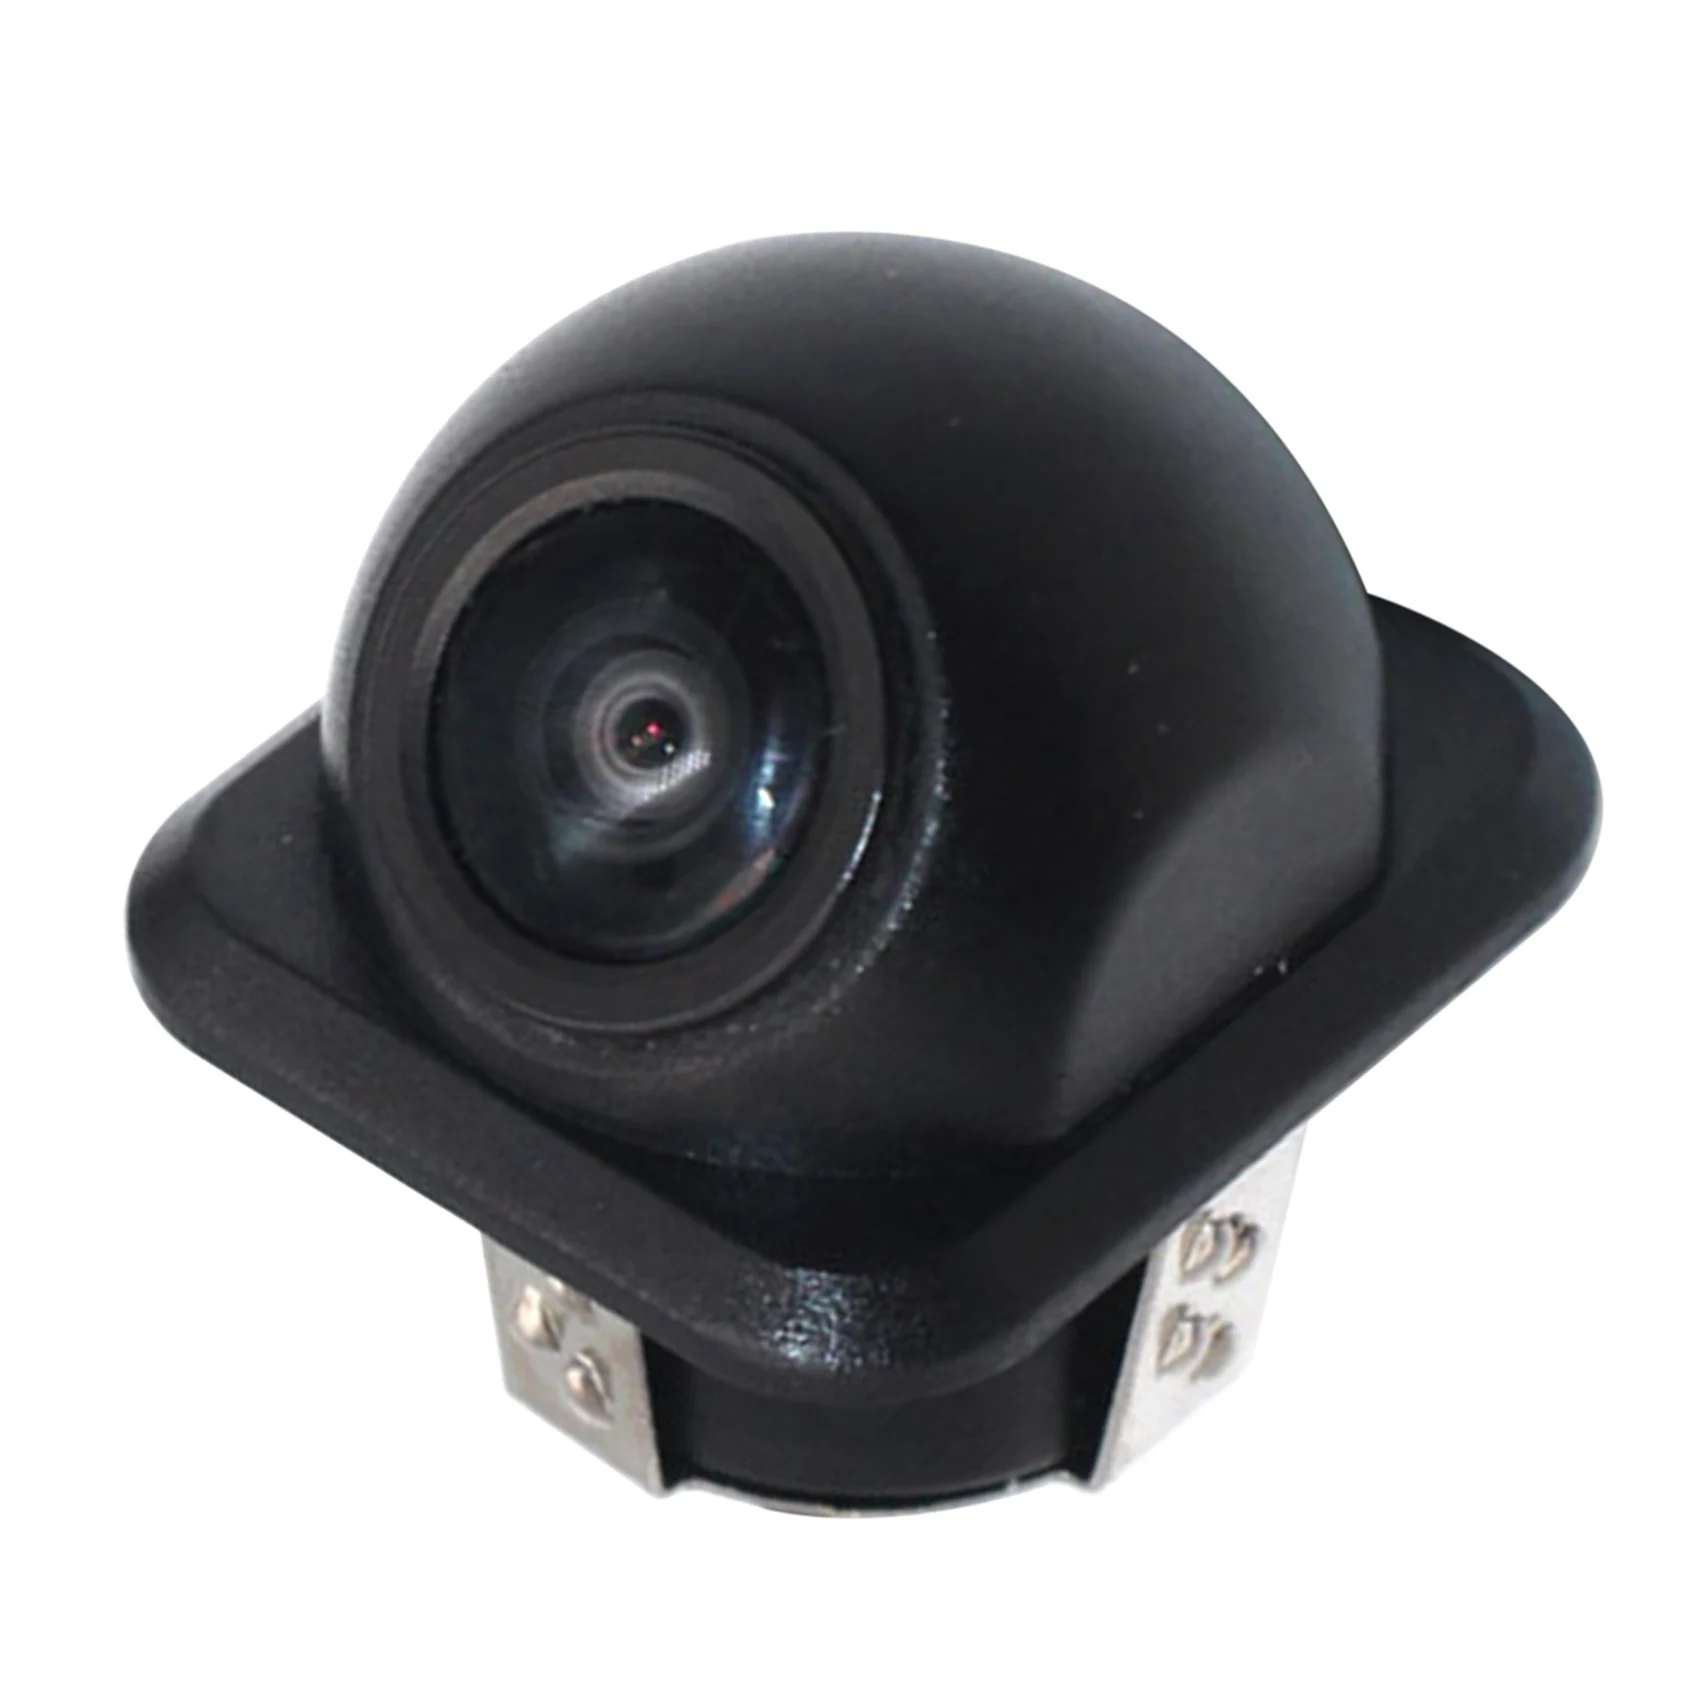 

CCD Fisheye Lens Dynamic Track Car Camera Front/Rear View Wide-Angle Reversing Camera Night Vision Parking Assist